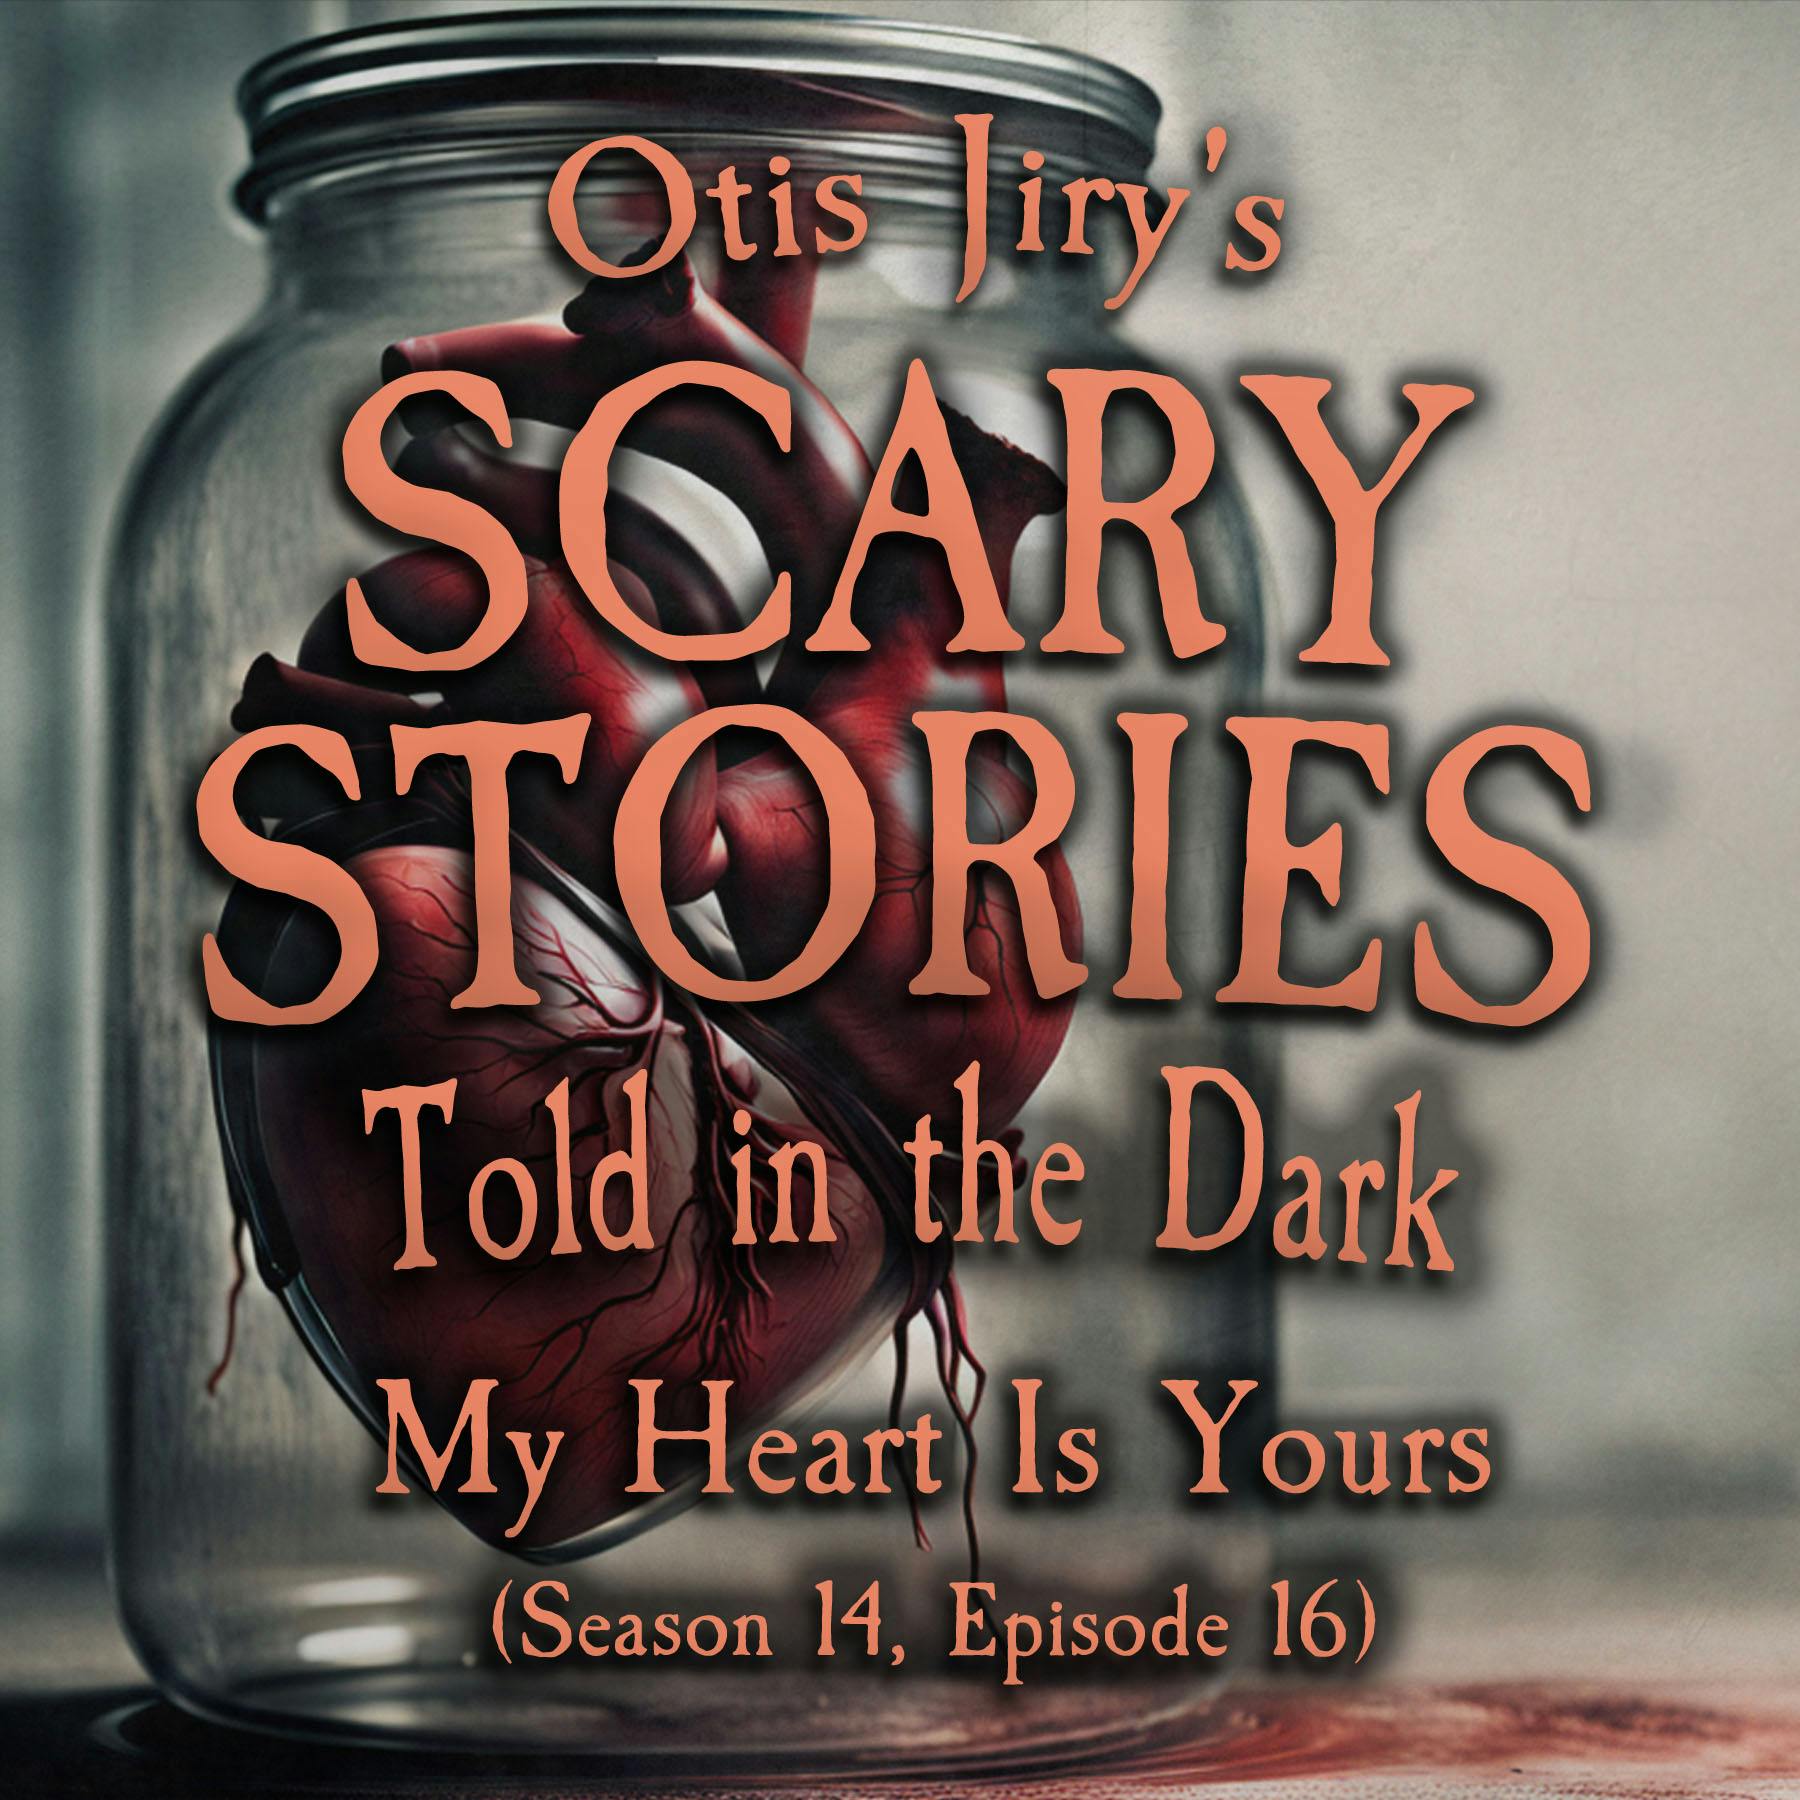 S14E16 - ”My Heart is Yours” – Scary Stories Told in the Dark